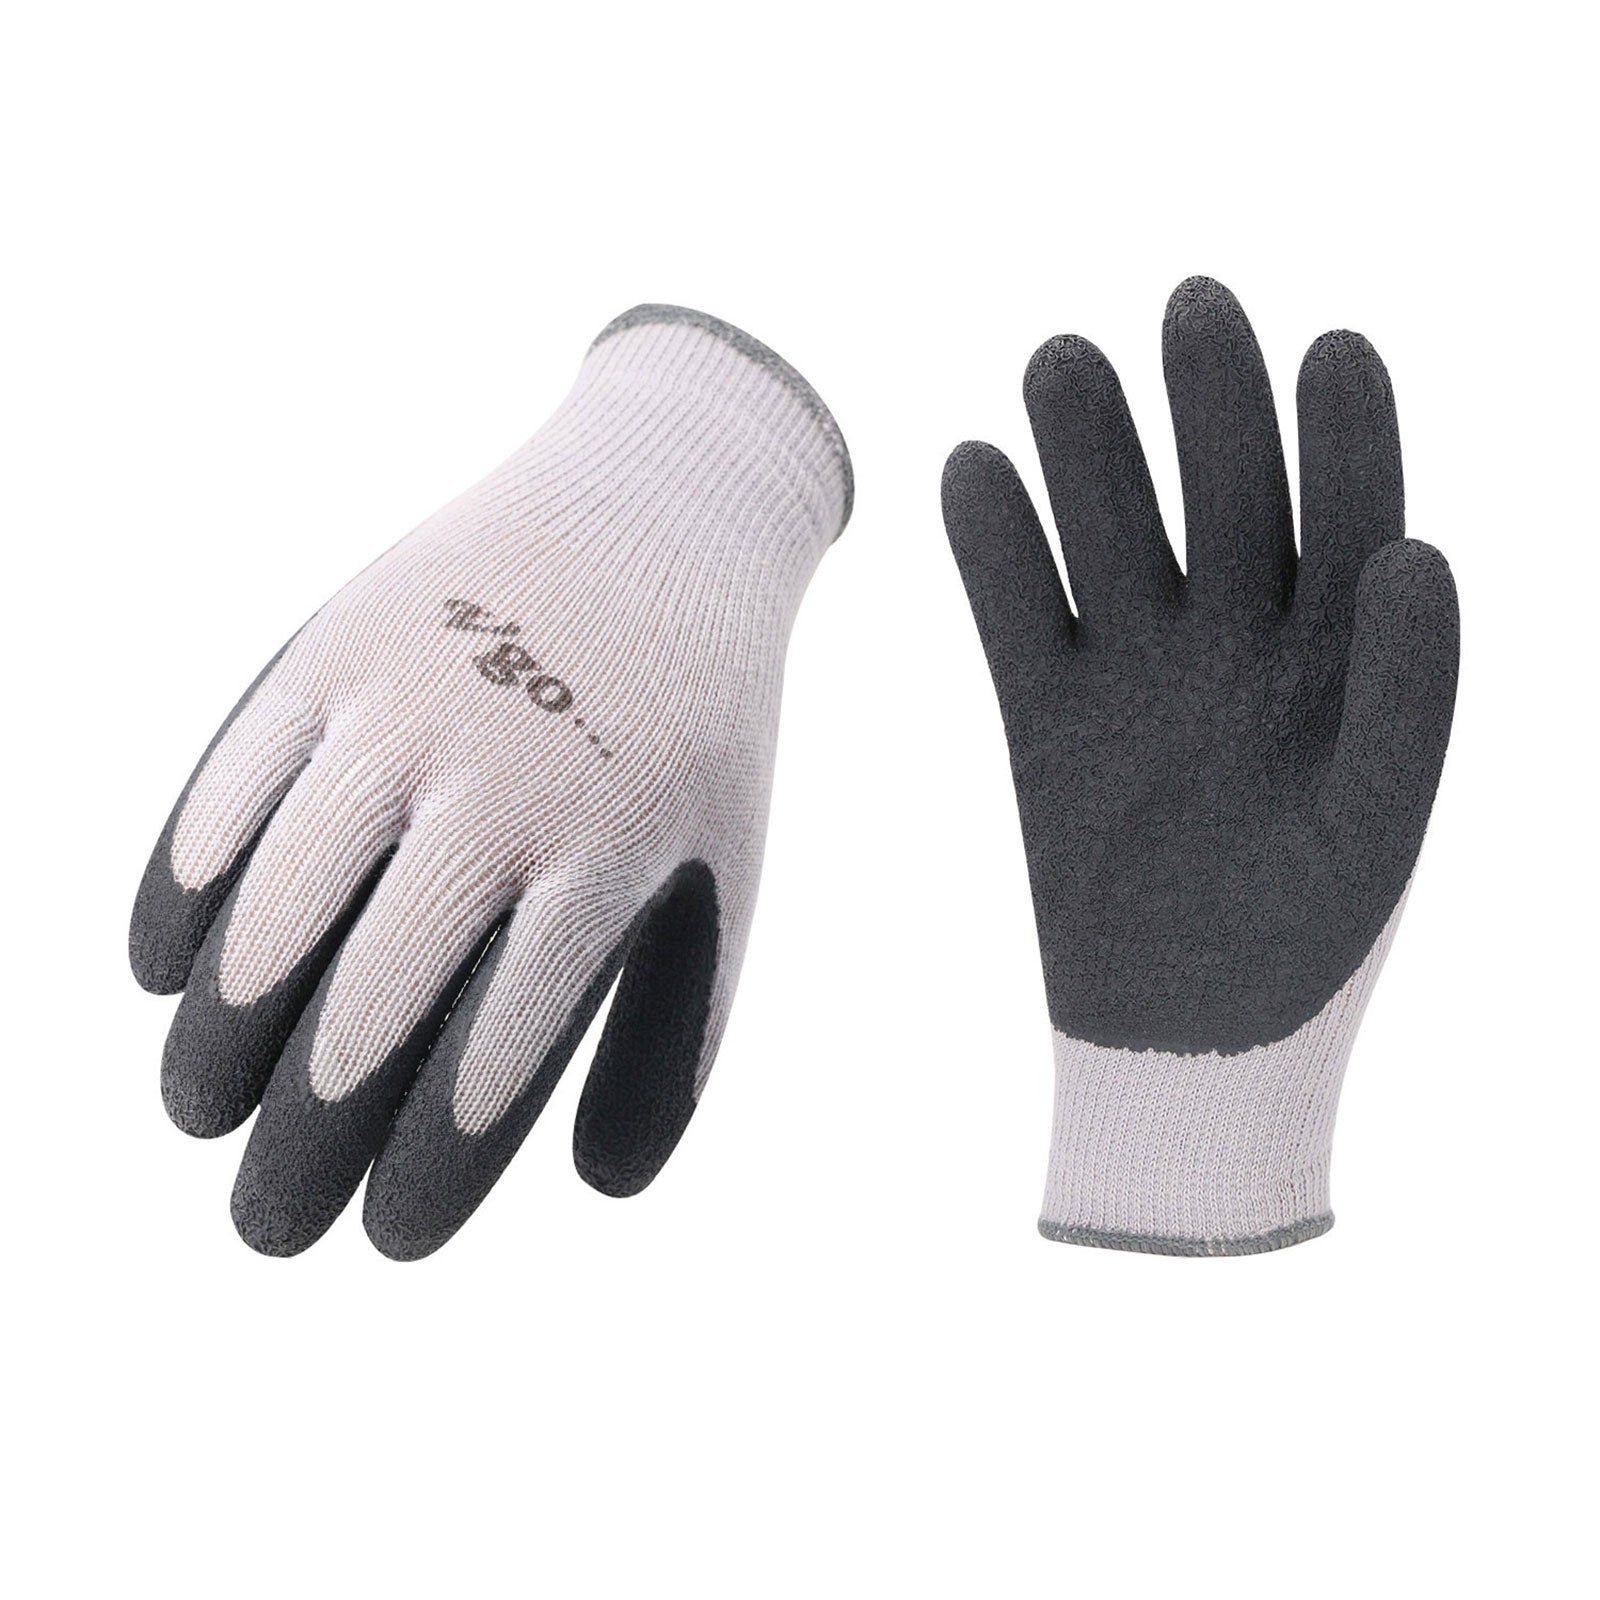 Men's Top Safety Gloves - Highest Cut and Abrasion Protection